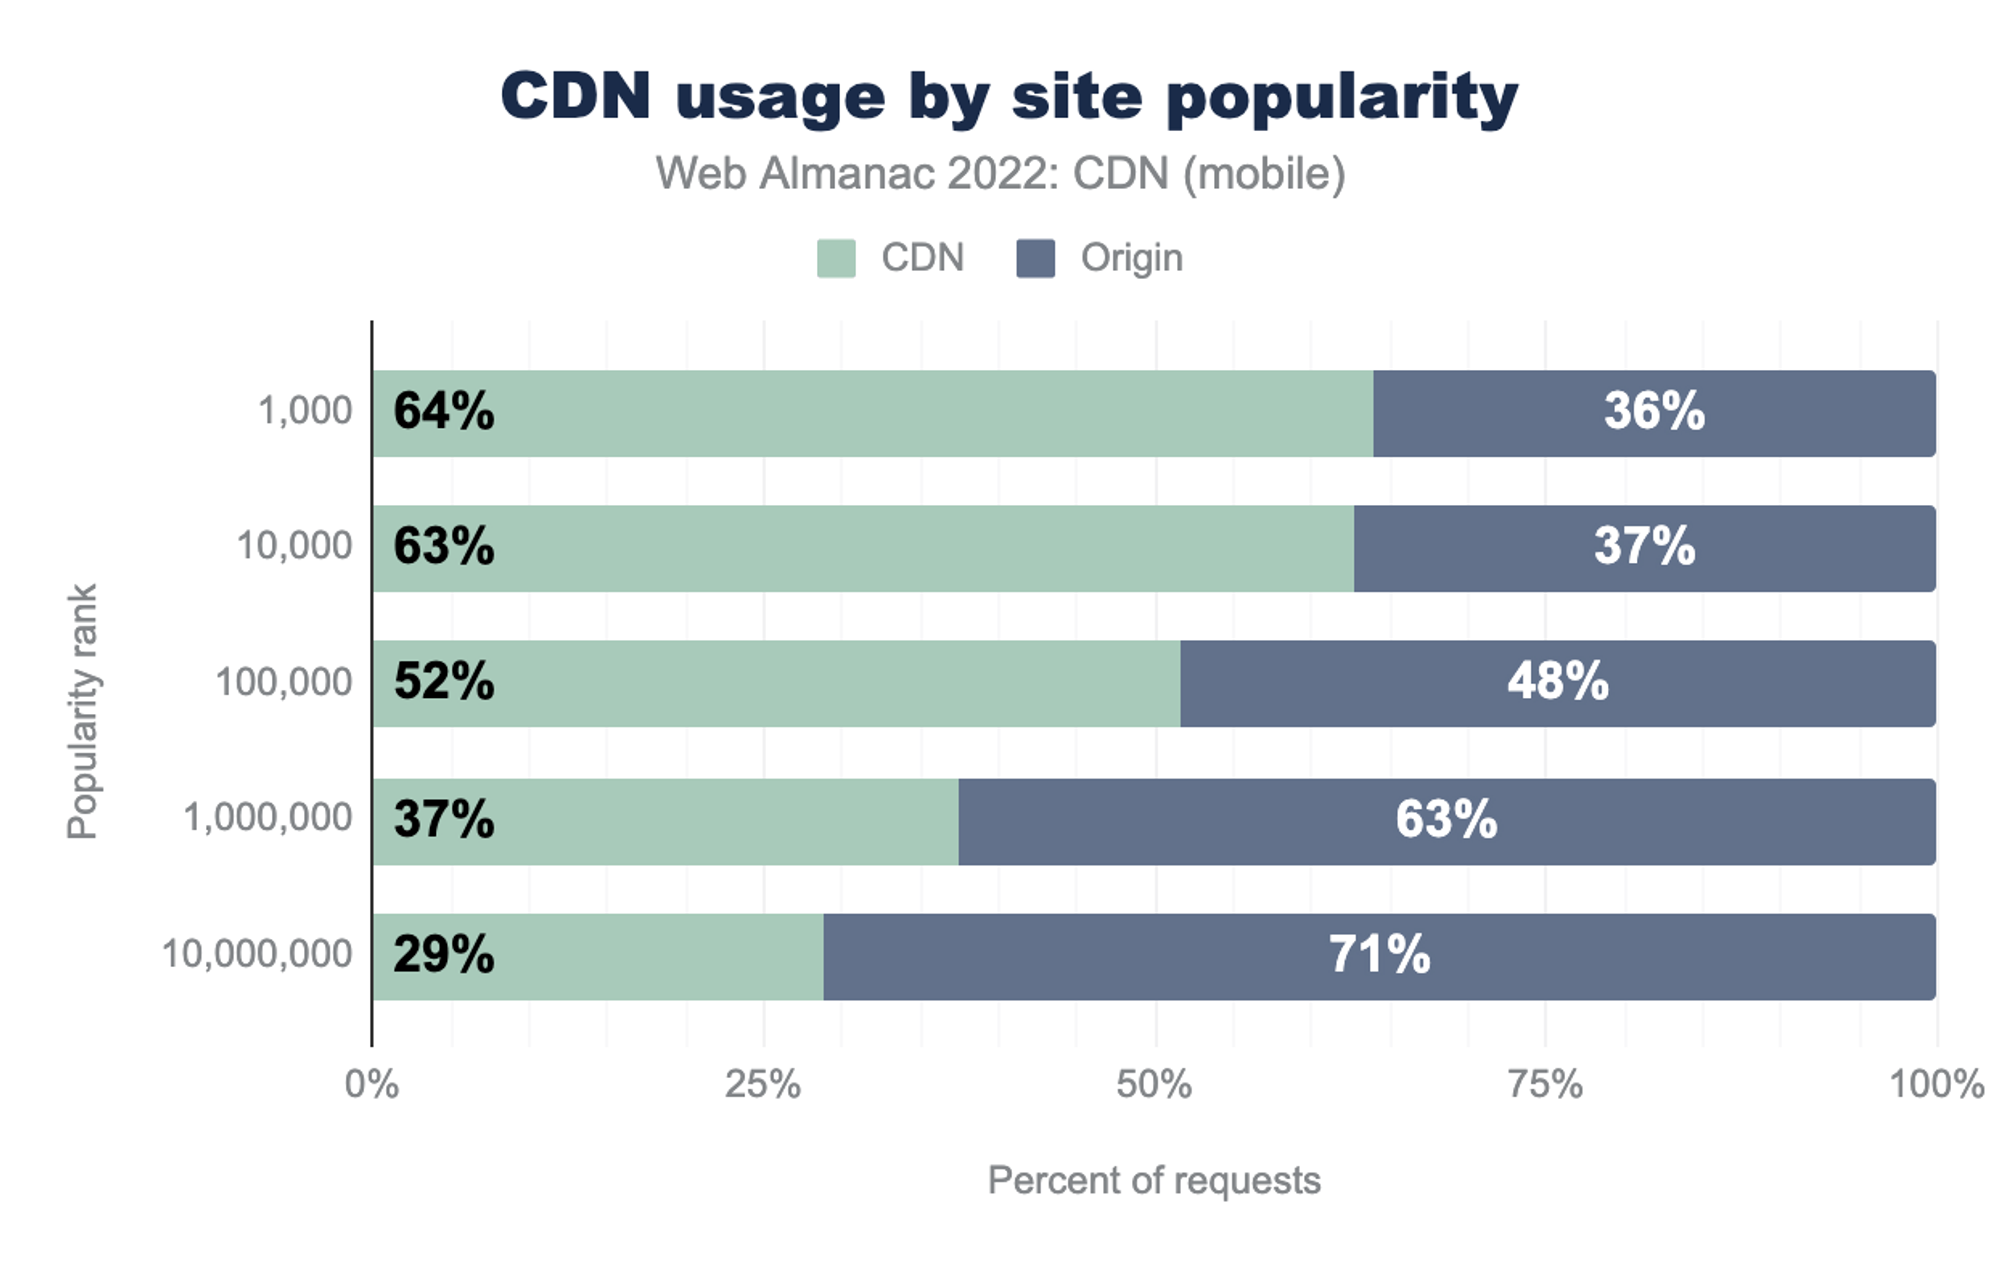 Bar chart which provides a view of CDN usage for mobile sites broken up for top 1,000, 10,000, 100,000, 1 million and 10 million popular sites as per Google CRUX data. For Top 1,000 sites the CDN adoption is 64%. For the top 10,000 sites, it's 63%. For the top 100,000 sites, it's 52%. For the top 1 million sites, it's 37%. For the top 10 million sites, it's 29%.